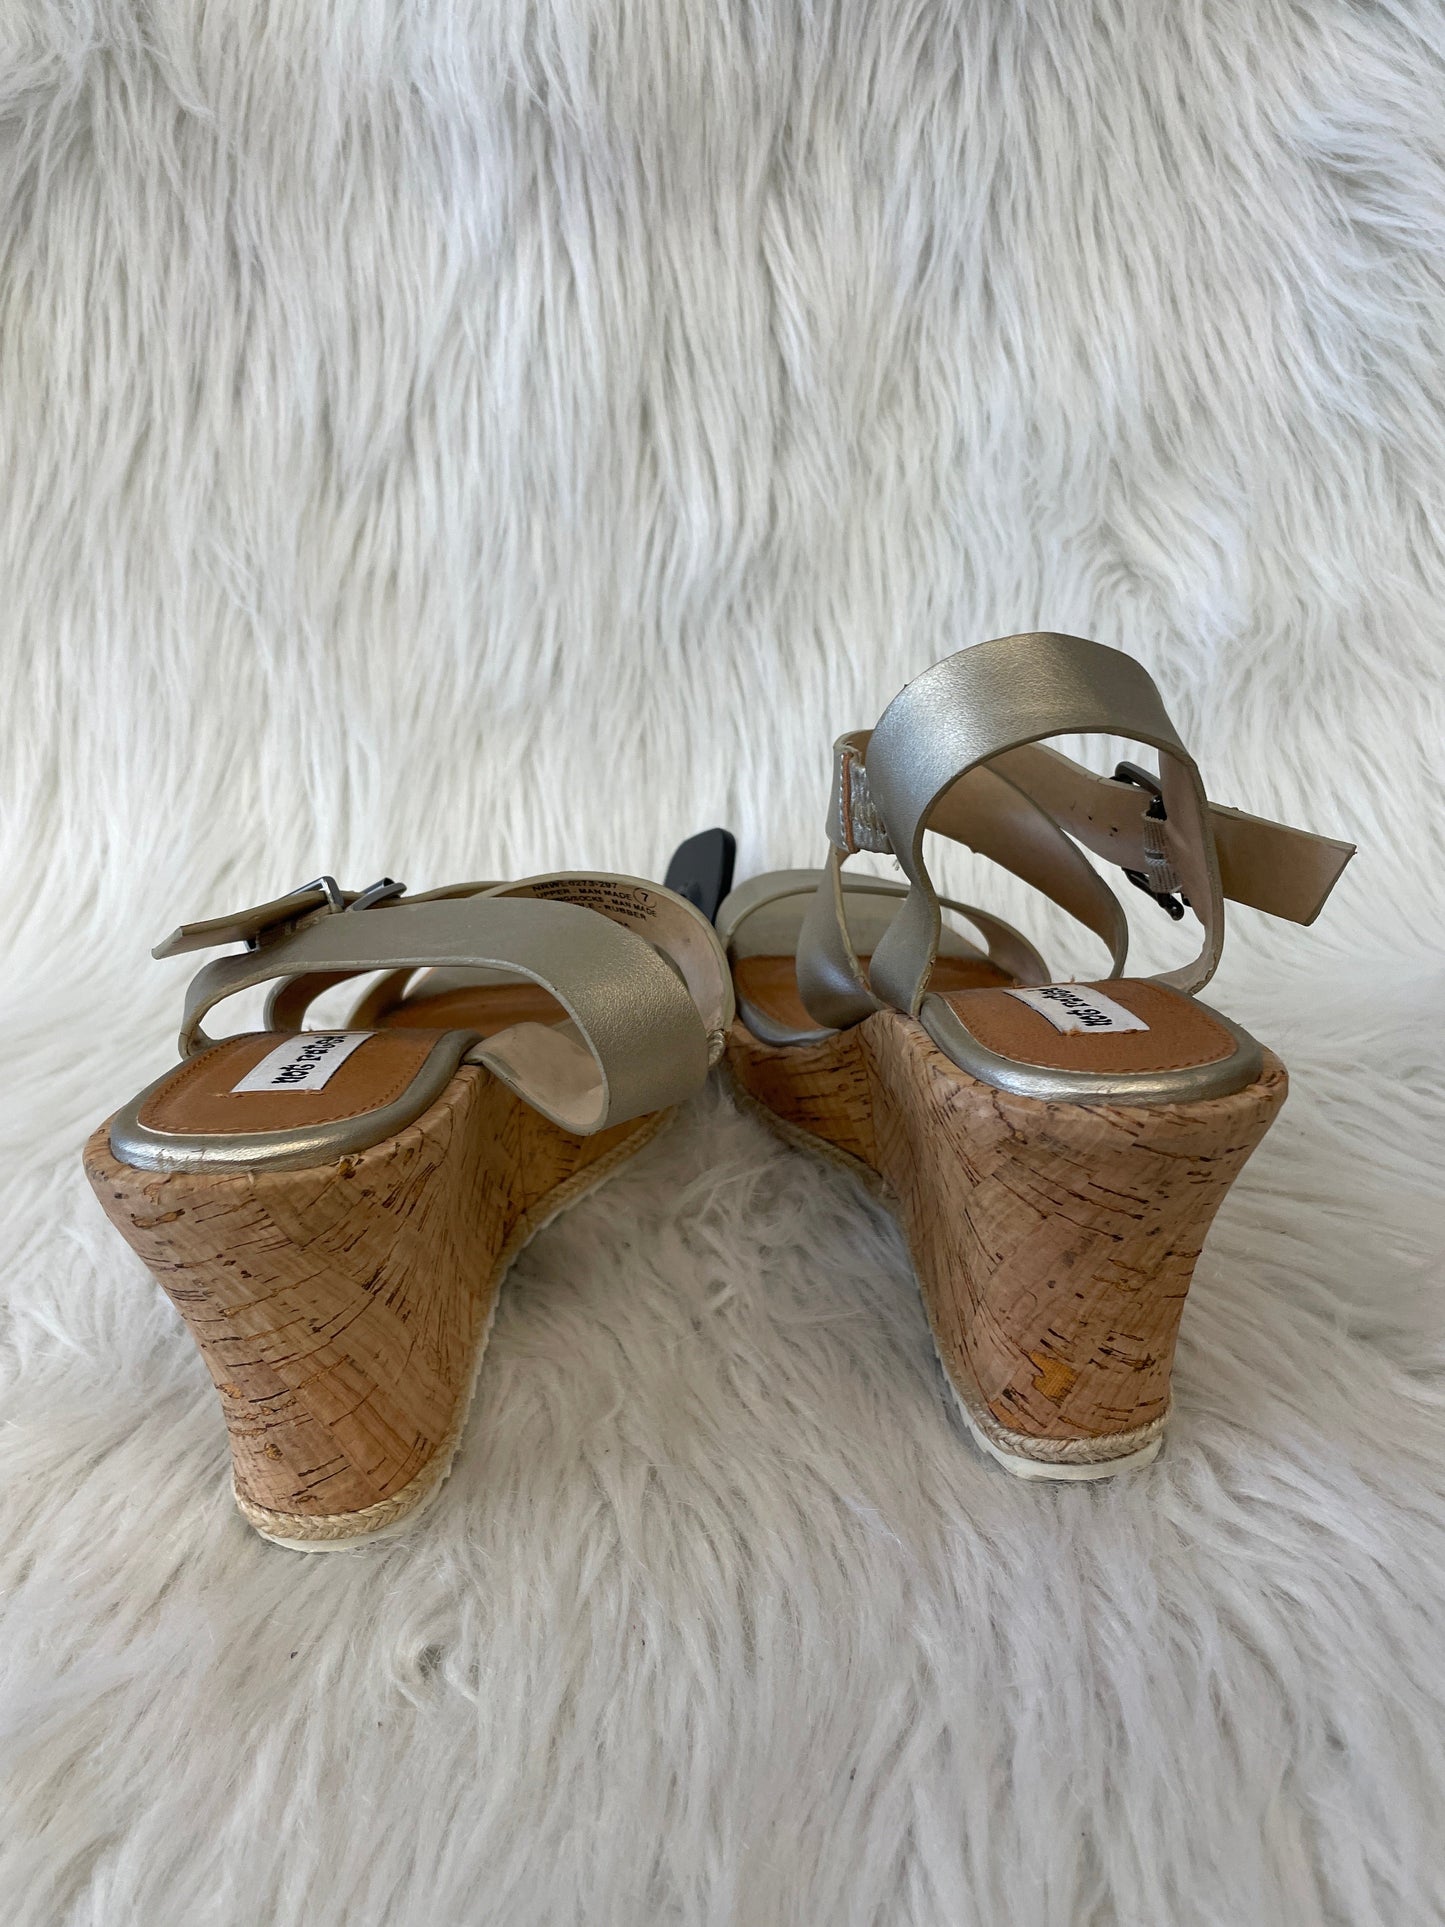 Gold & White Sandals Heels Wedge Not Rated, Size 7